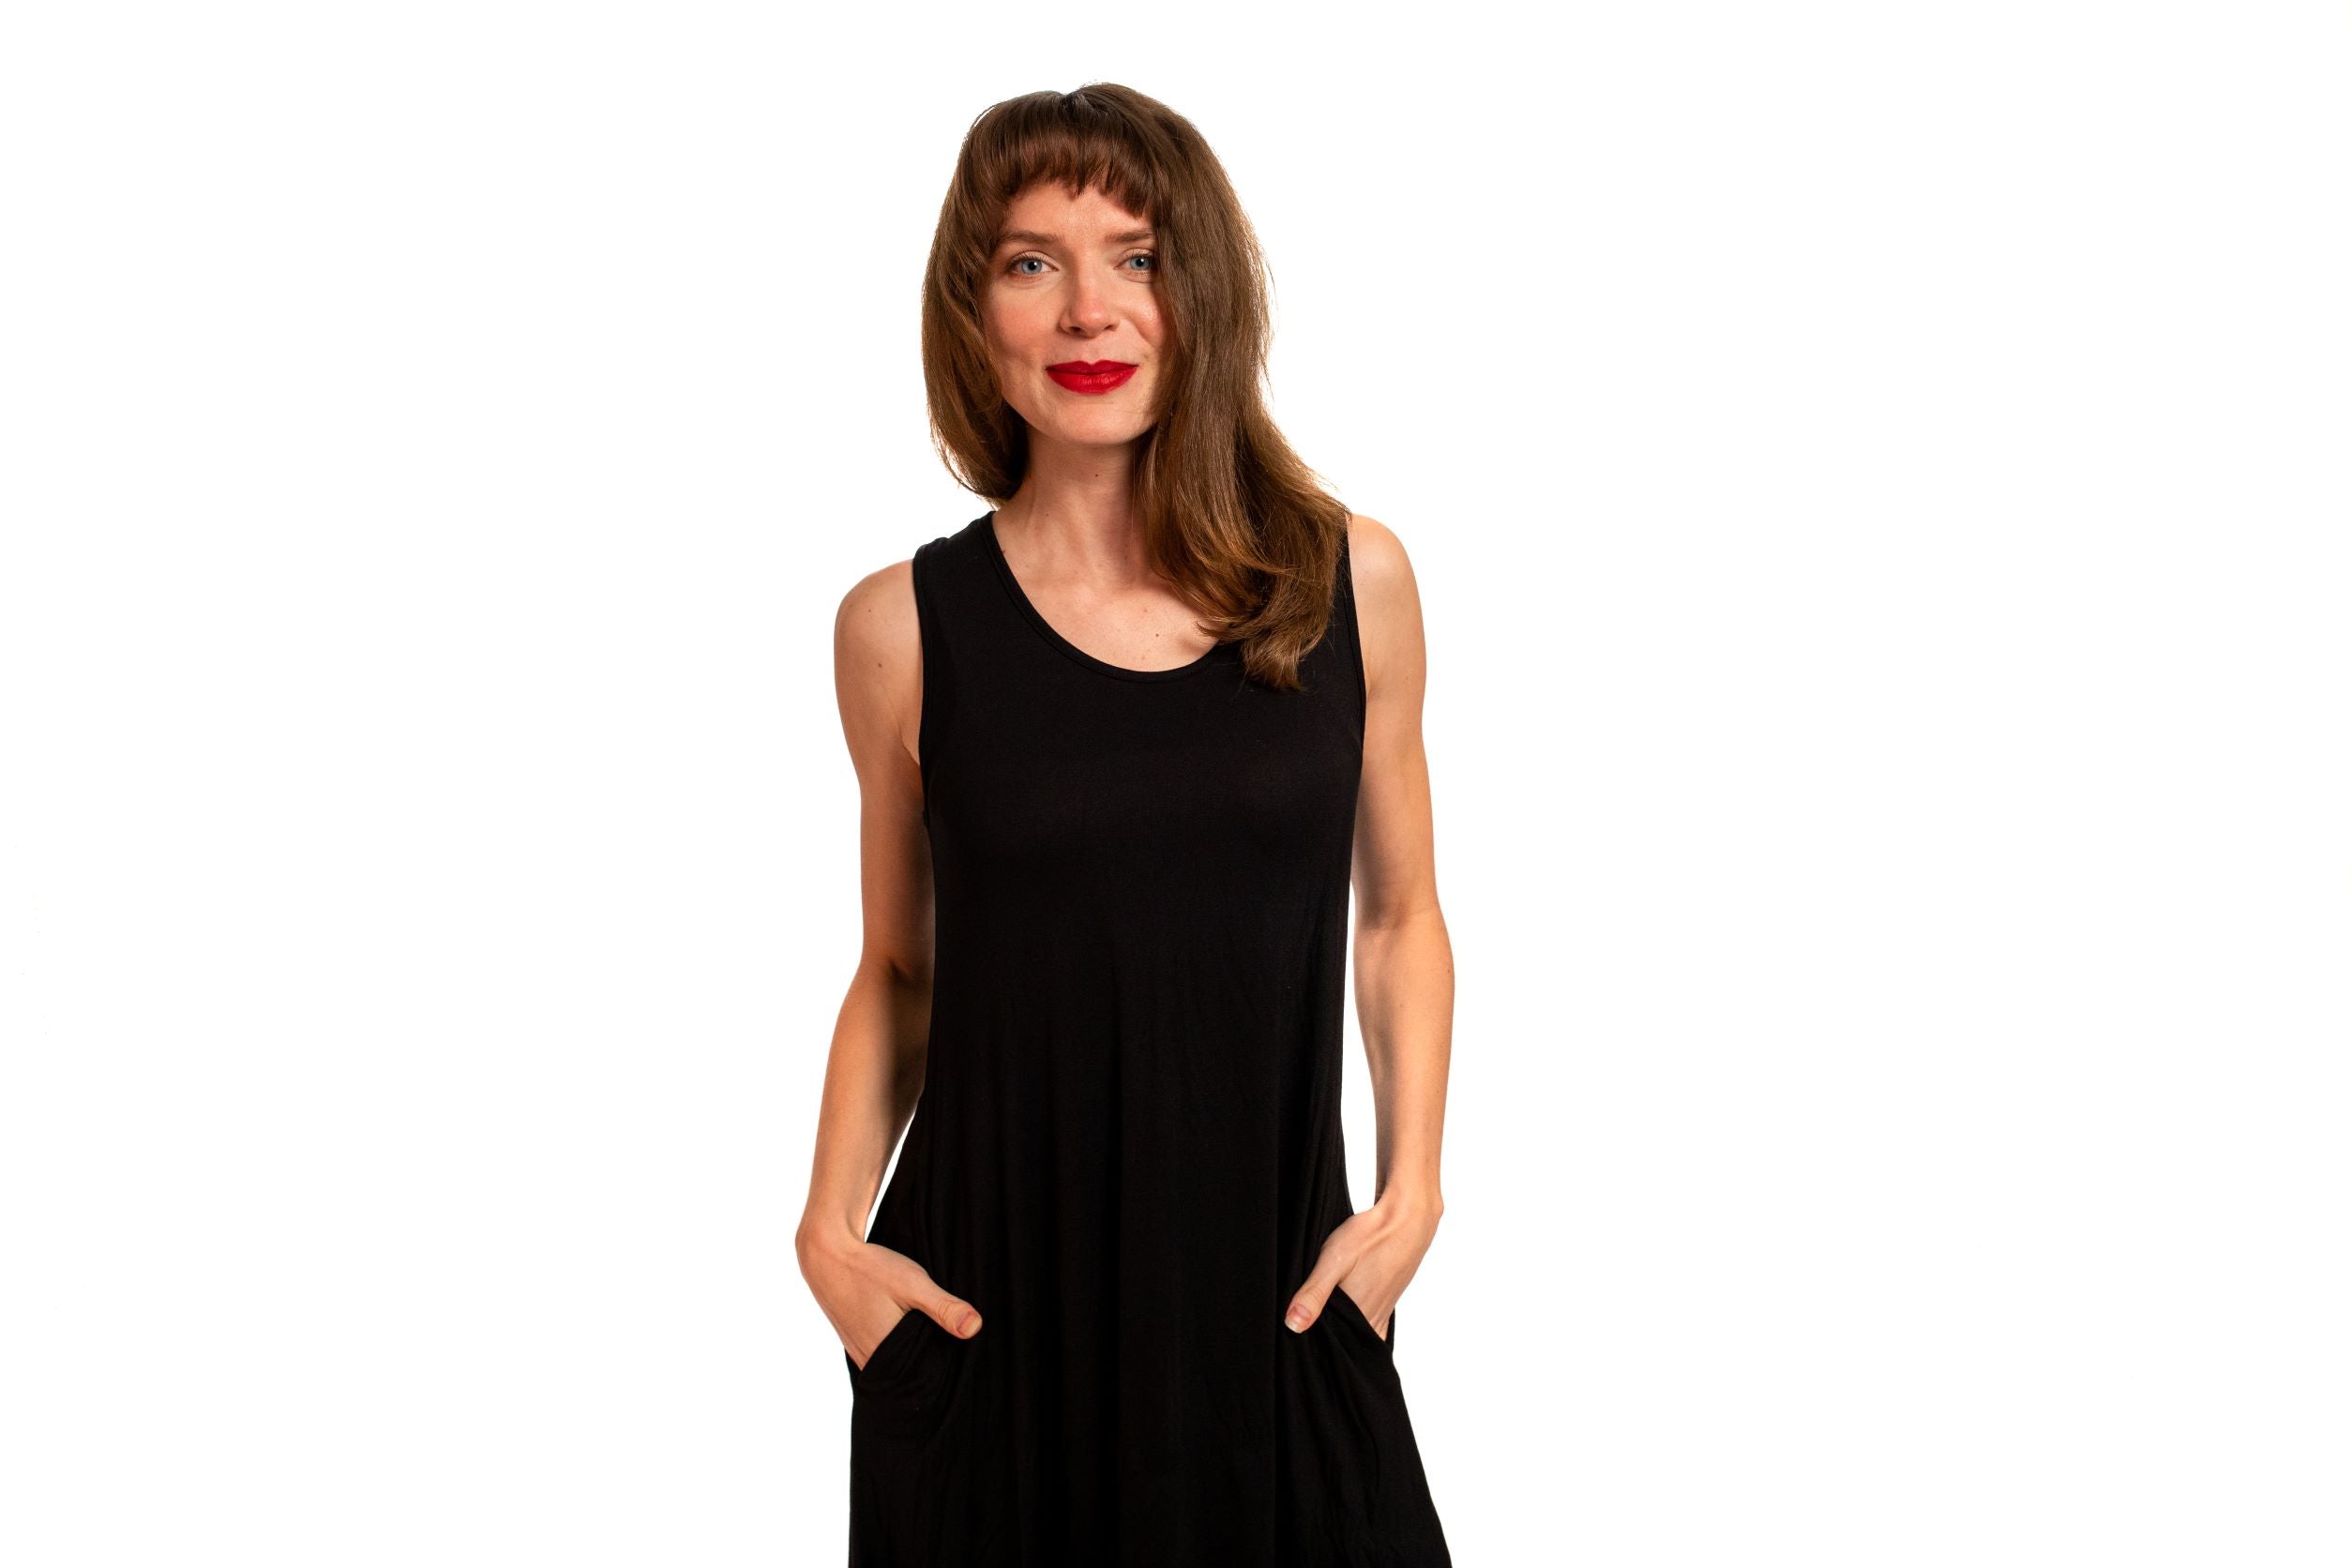 Women's A-line dress 2" above the knee sleeveless and side pockets.